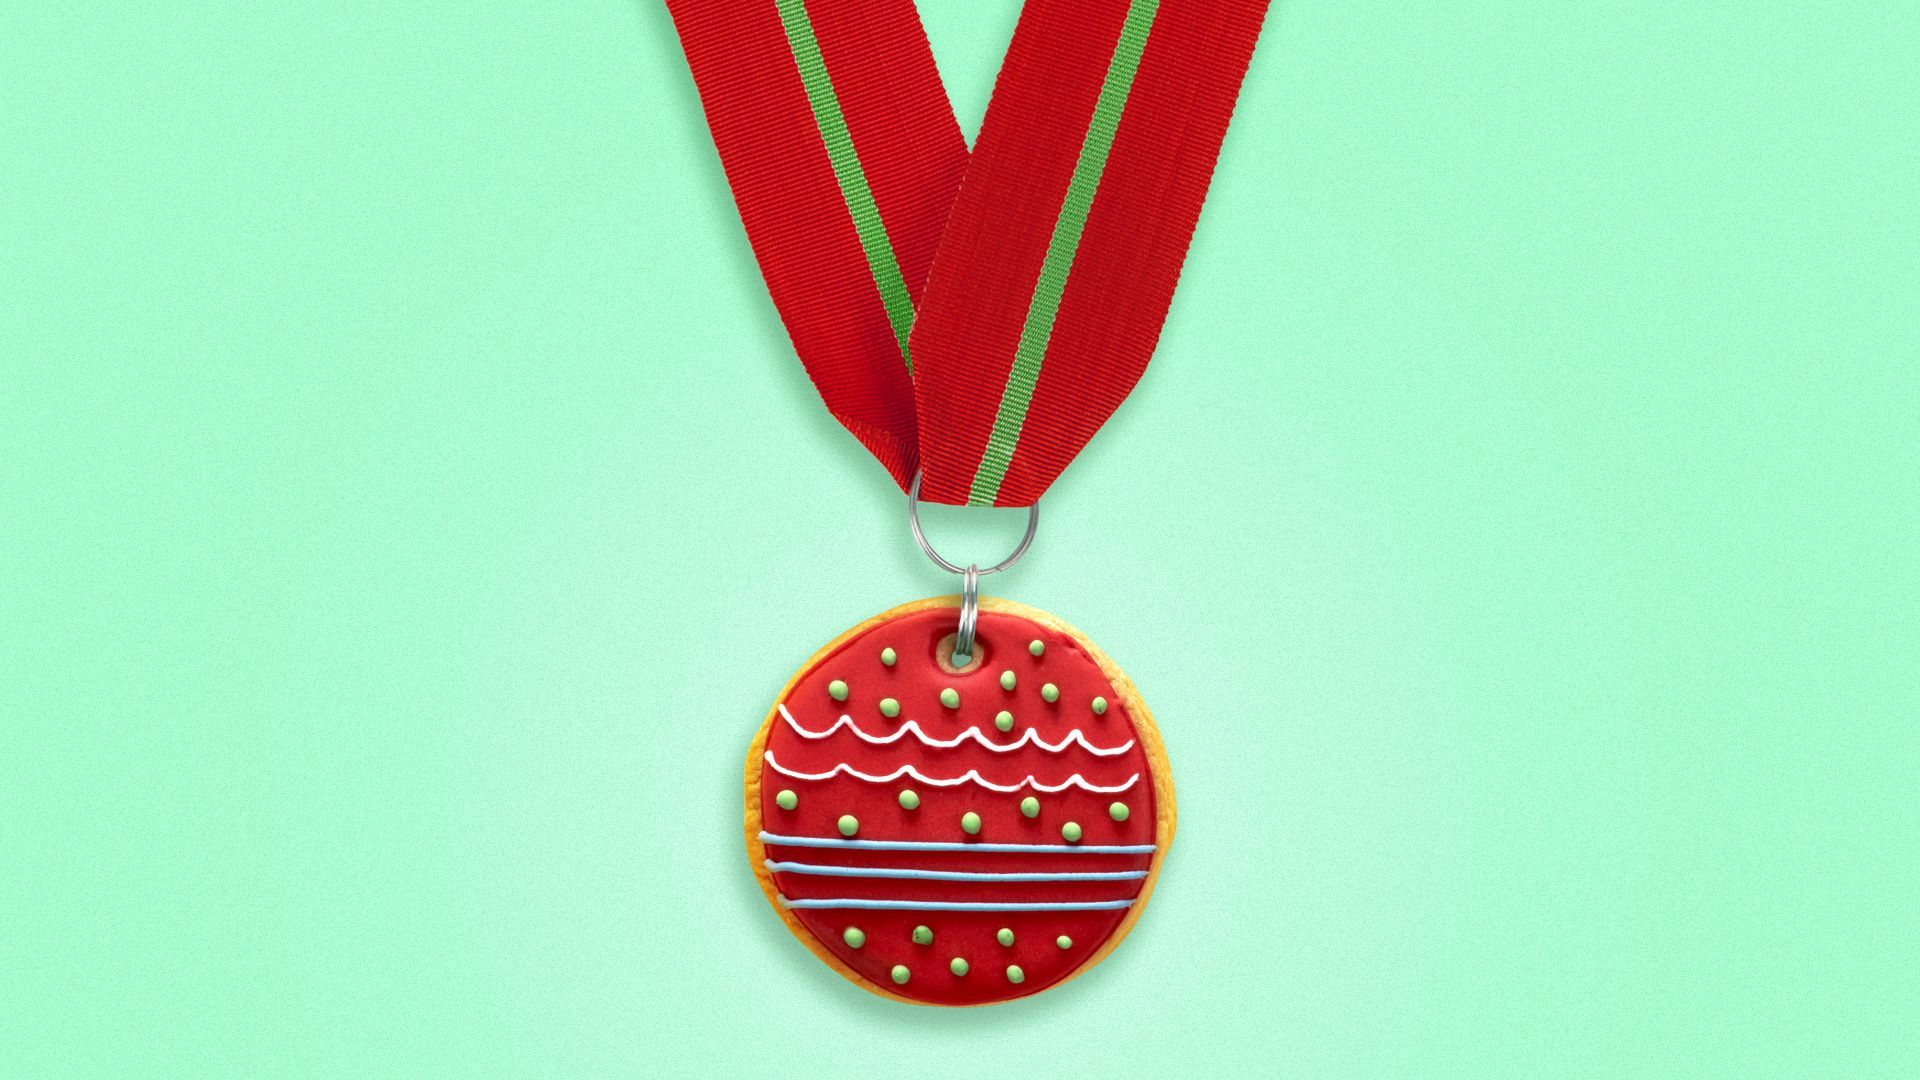 Illustration of a Christmas cookie as a medal.